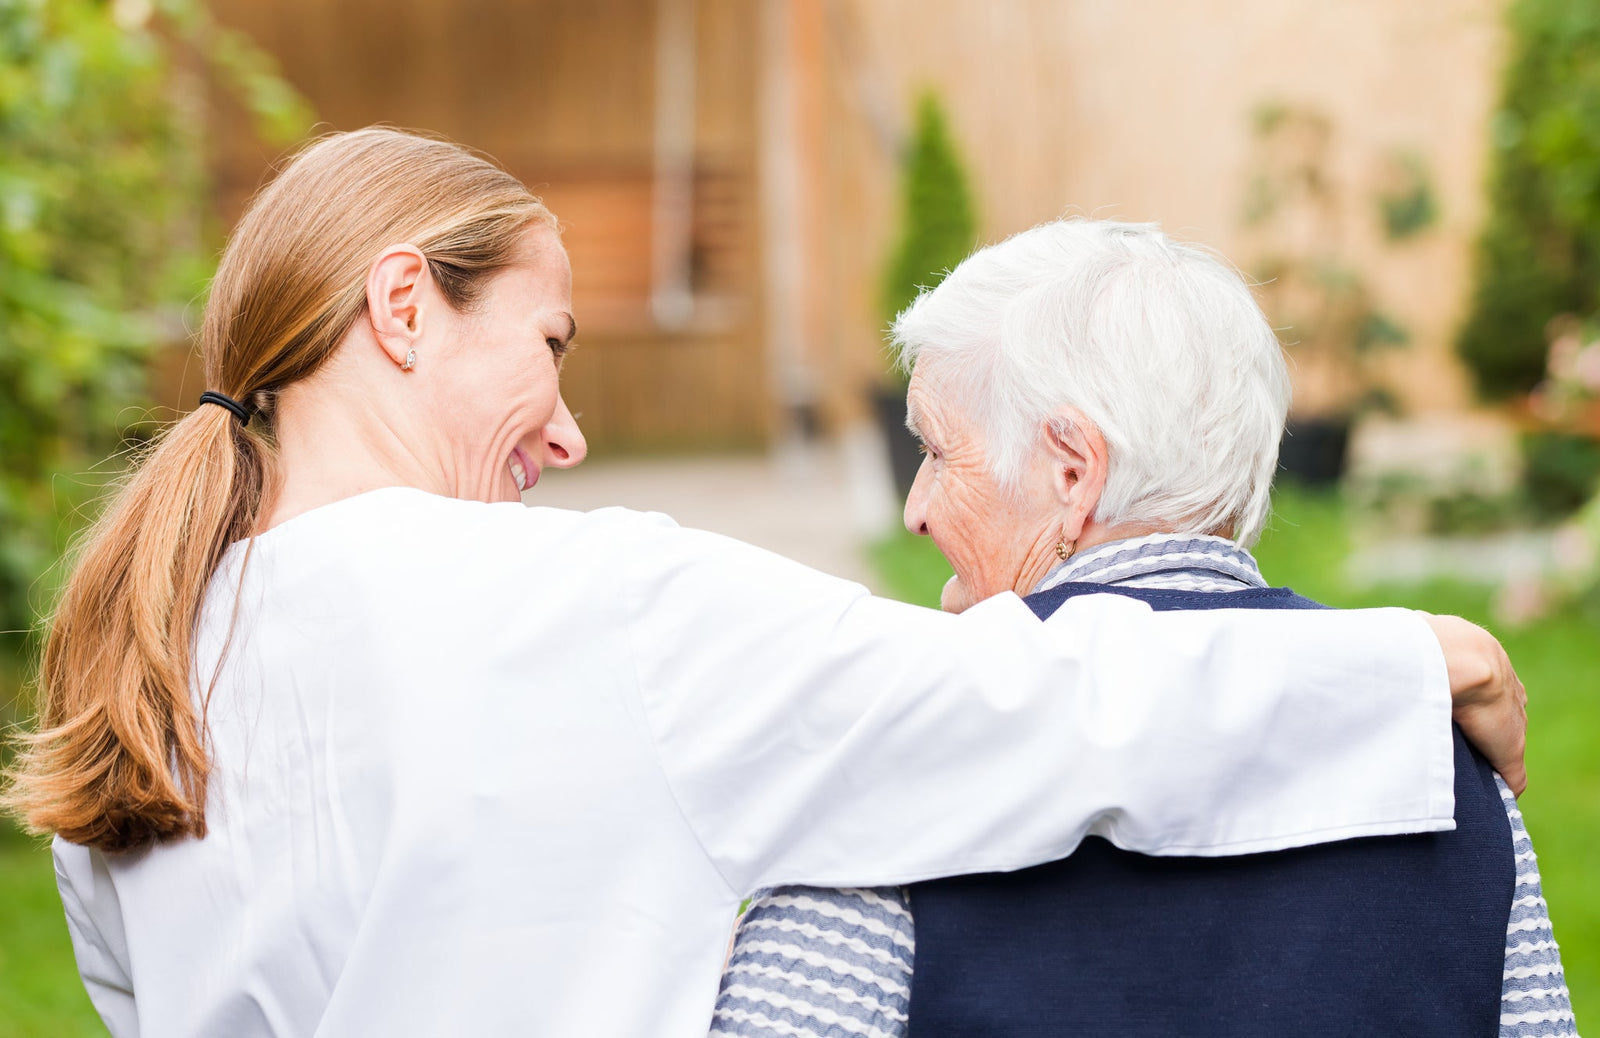 A female caregiver with her arm wrapped around an older woman's shoulders